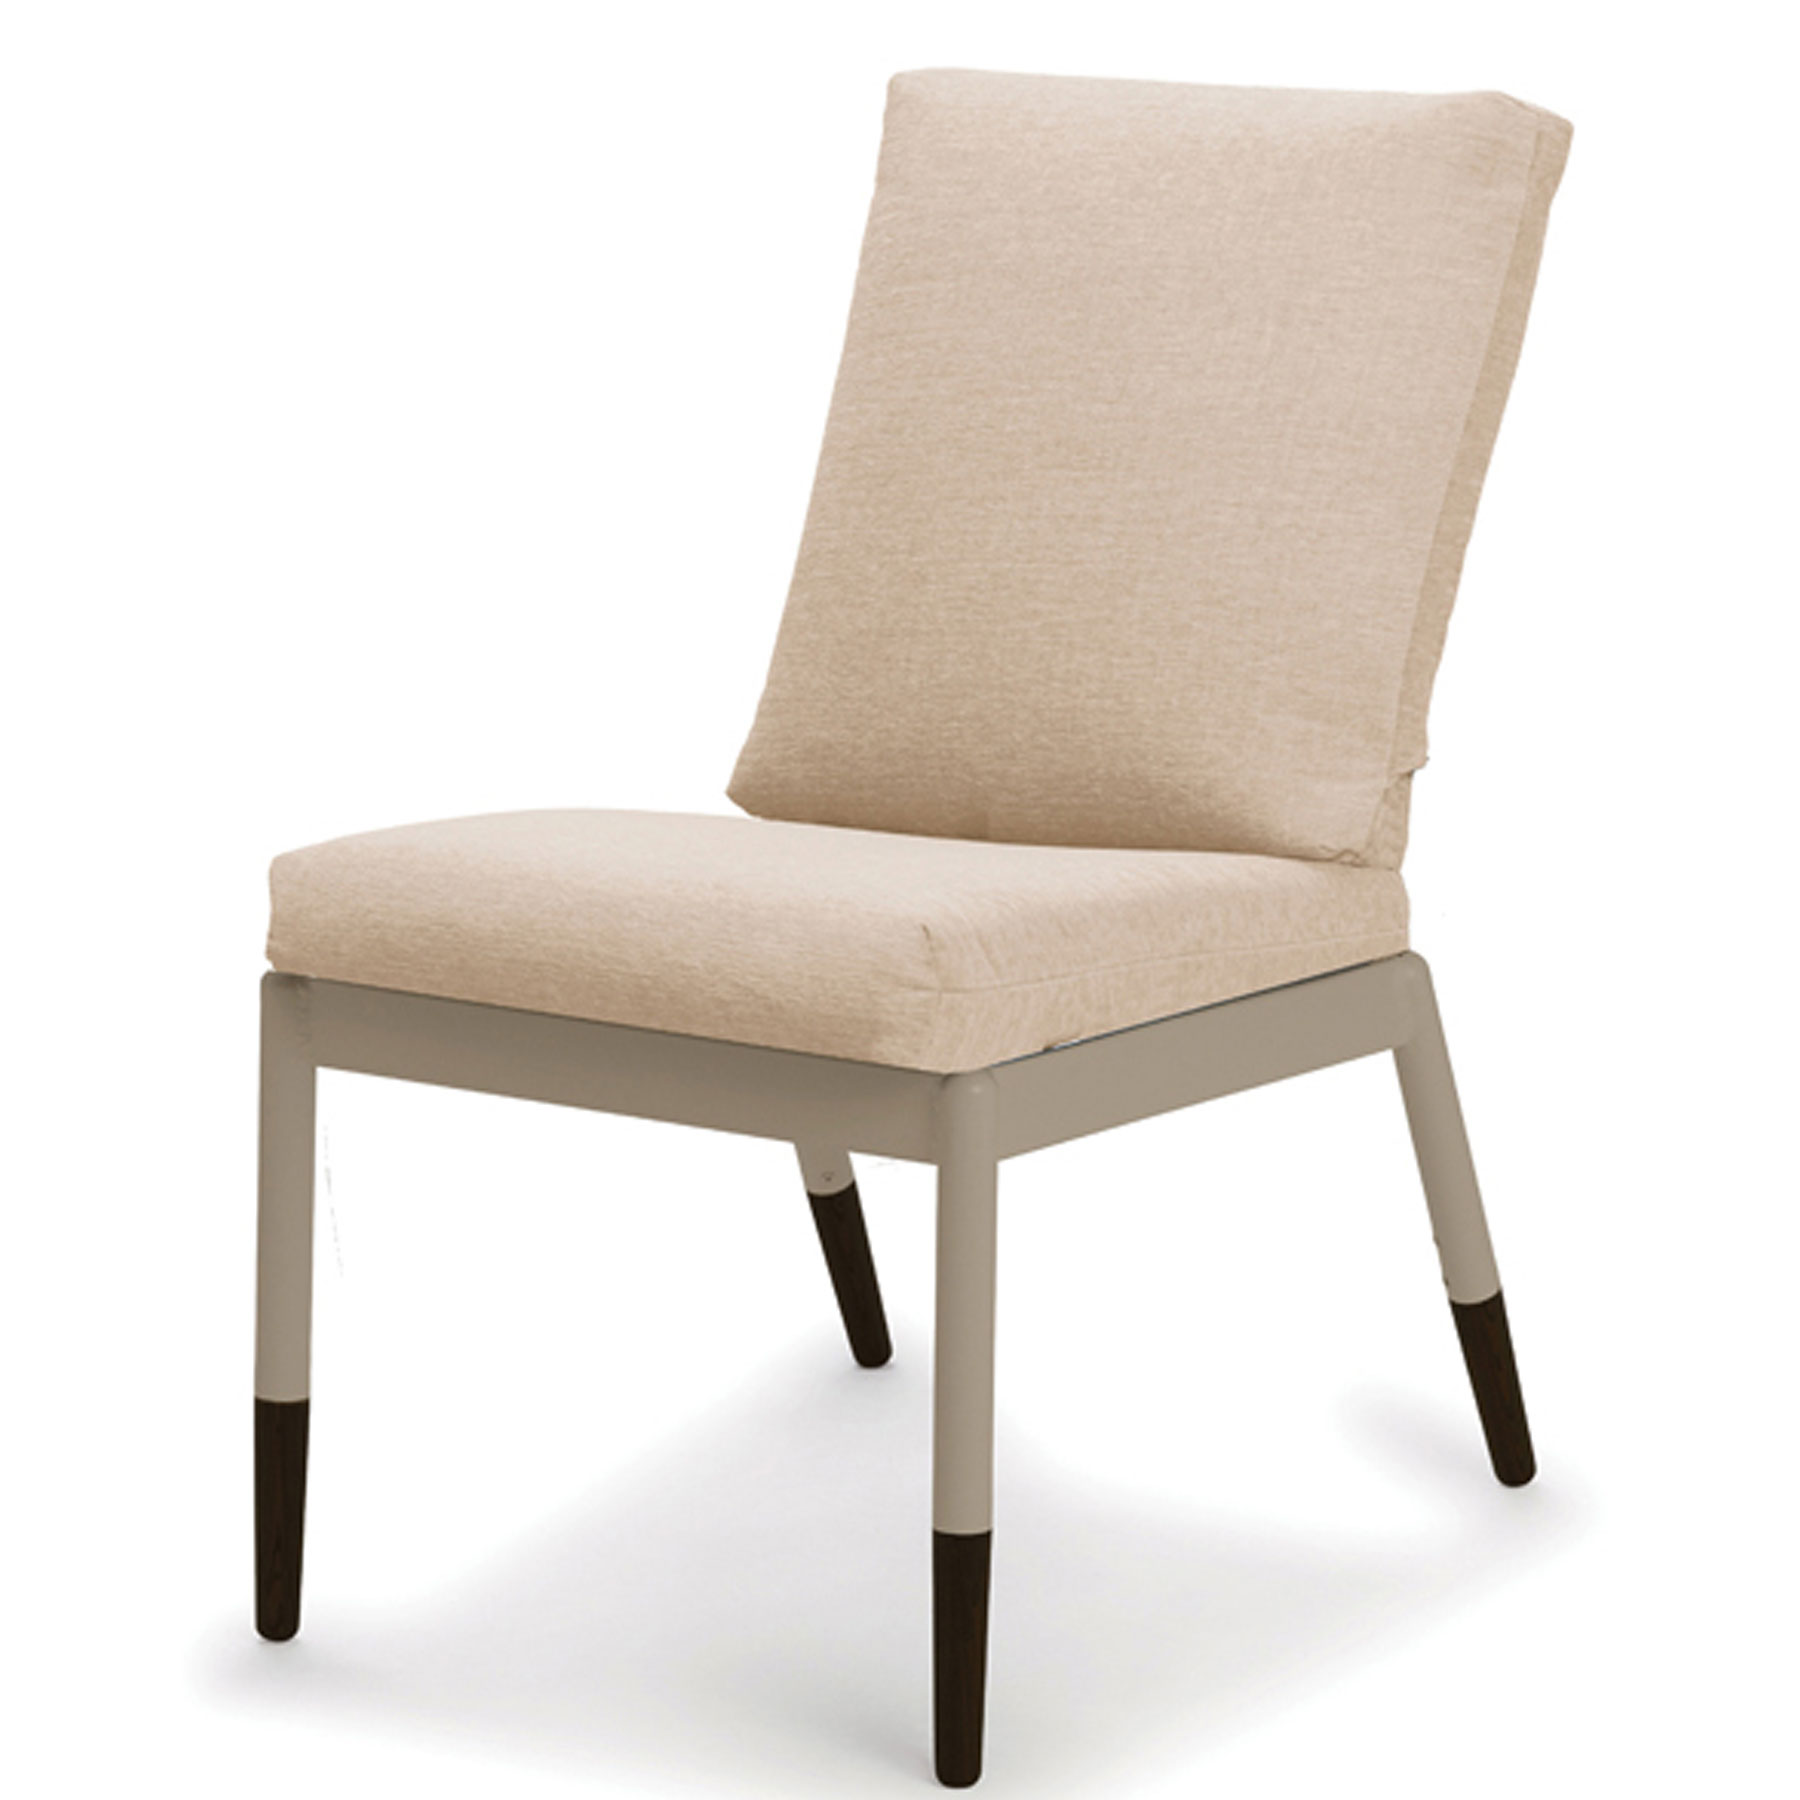 Telescope Casual Welles Armless Dining Chair without Welting